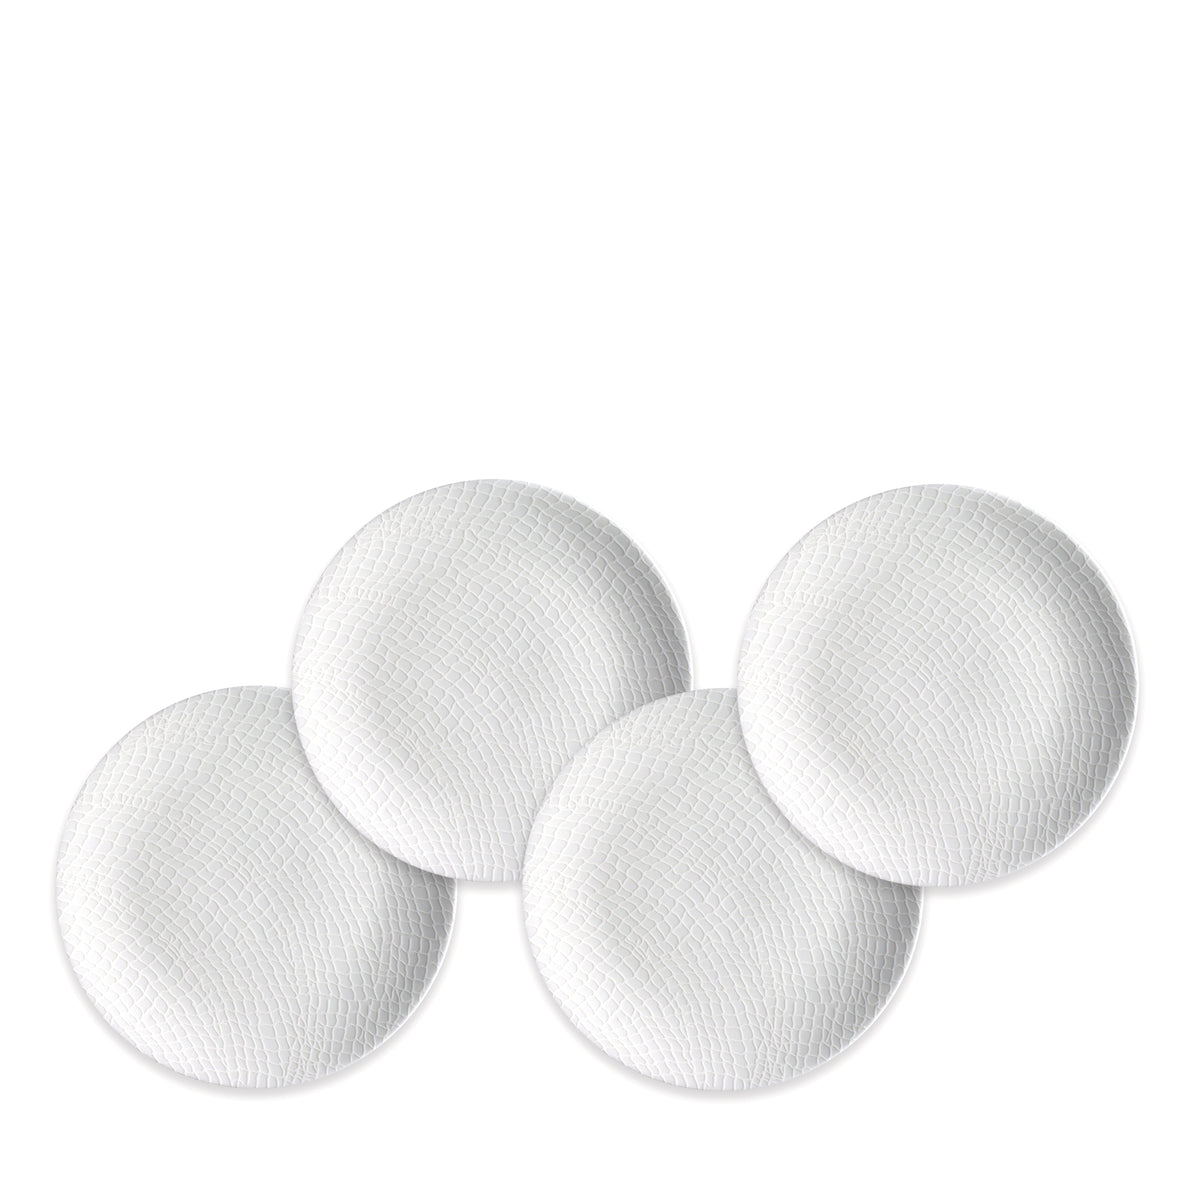 Four round, textured, white Catch Small Plates from Caskata Artisanal Home are arranged in a slightly overlapping pattern against a plain background, reminiscent of small plates caught in a fisherman&#39;s net.